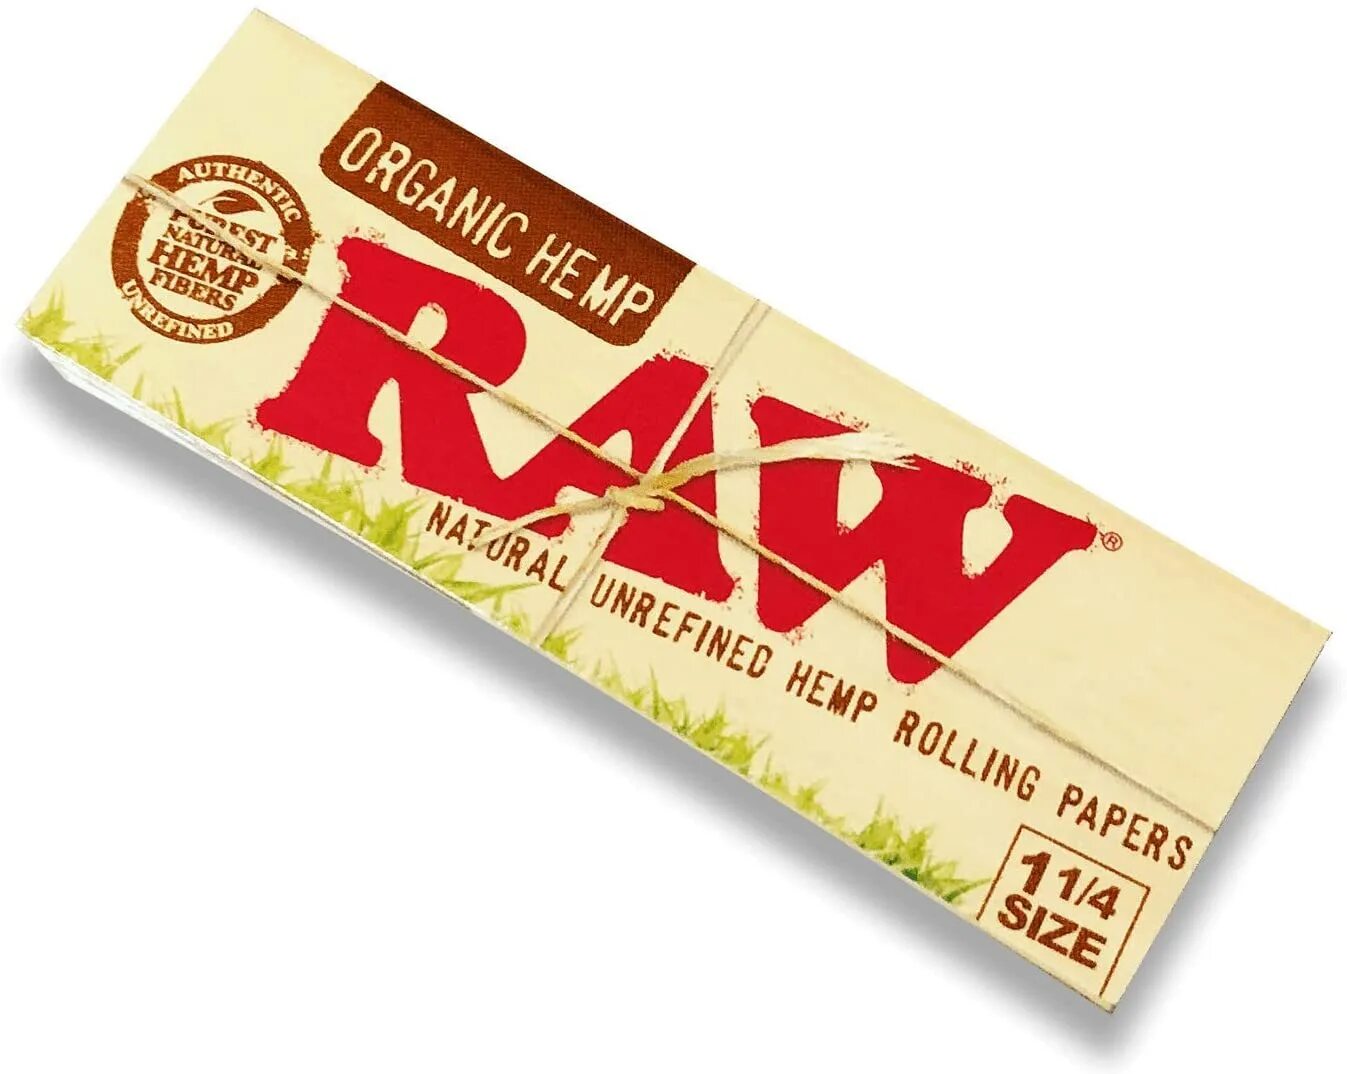 Buy roll. Raw бумага. Raw Rolling papers. Rolling paper. Raw бумажки.